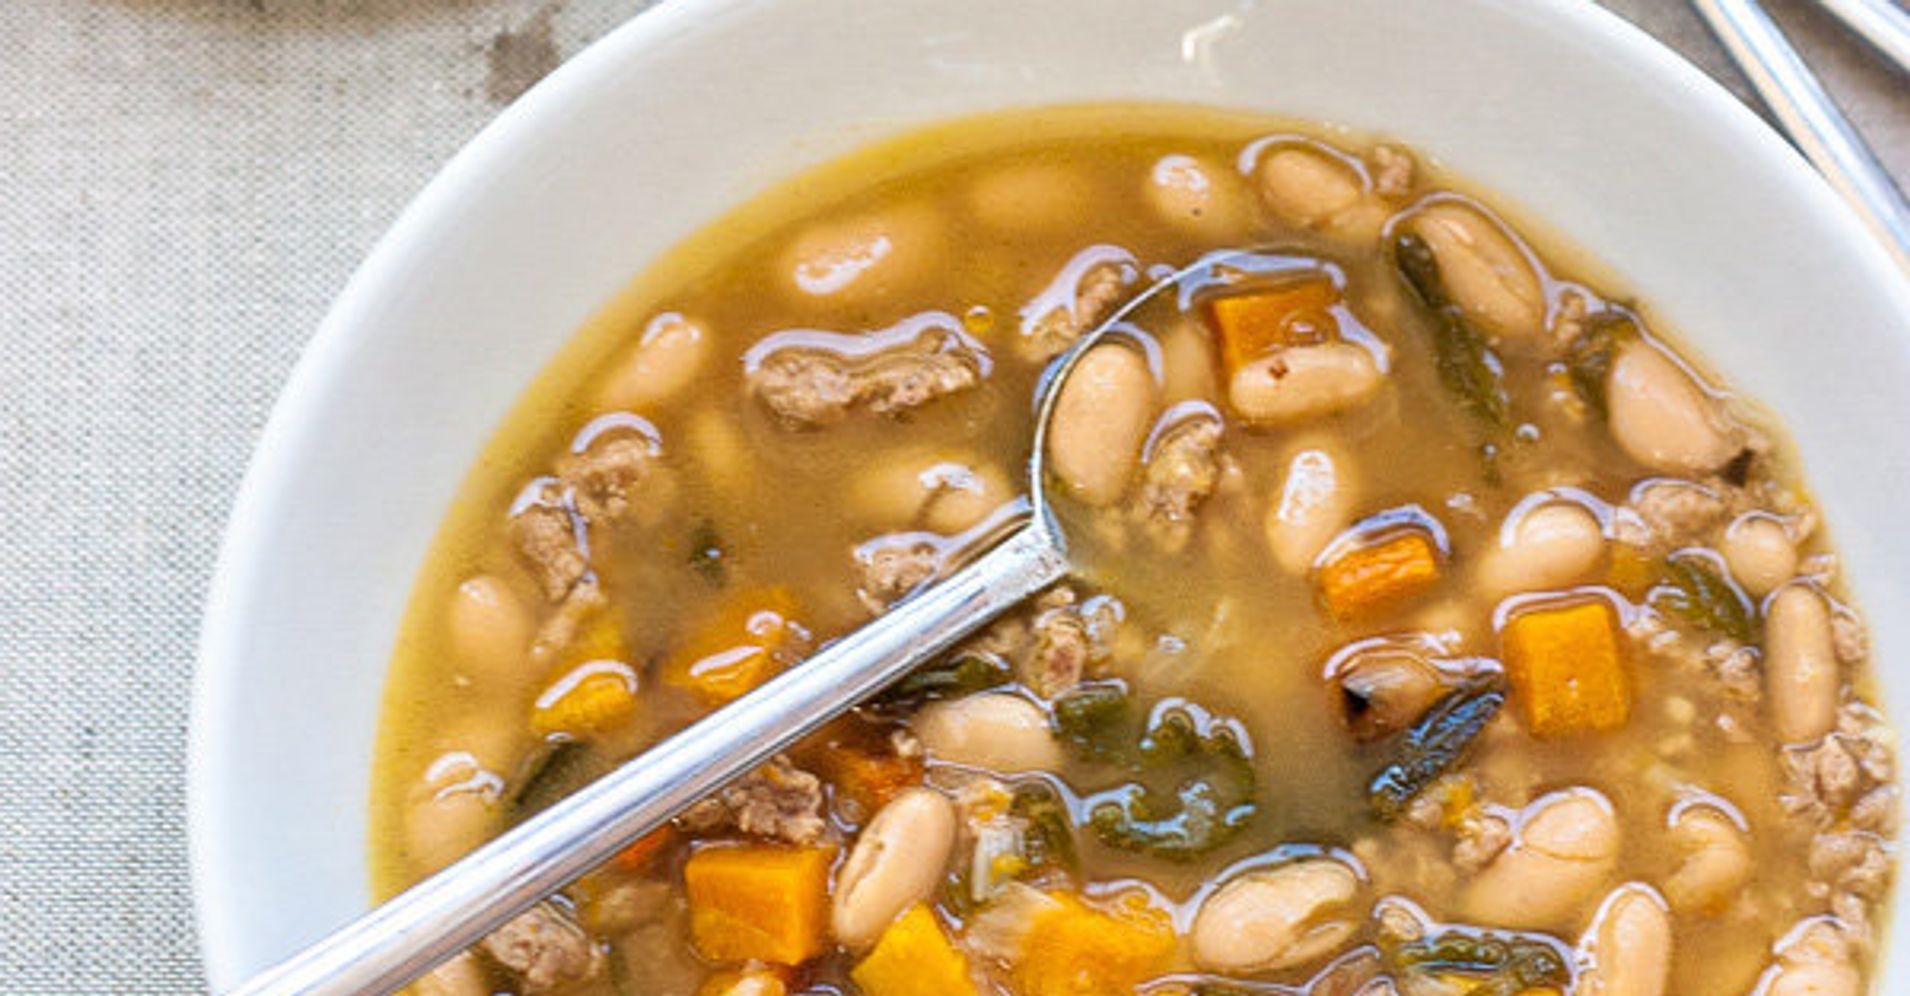 The Turkey Soup Recipes You Need After Thanksgiving | HuffPost